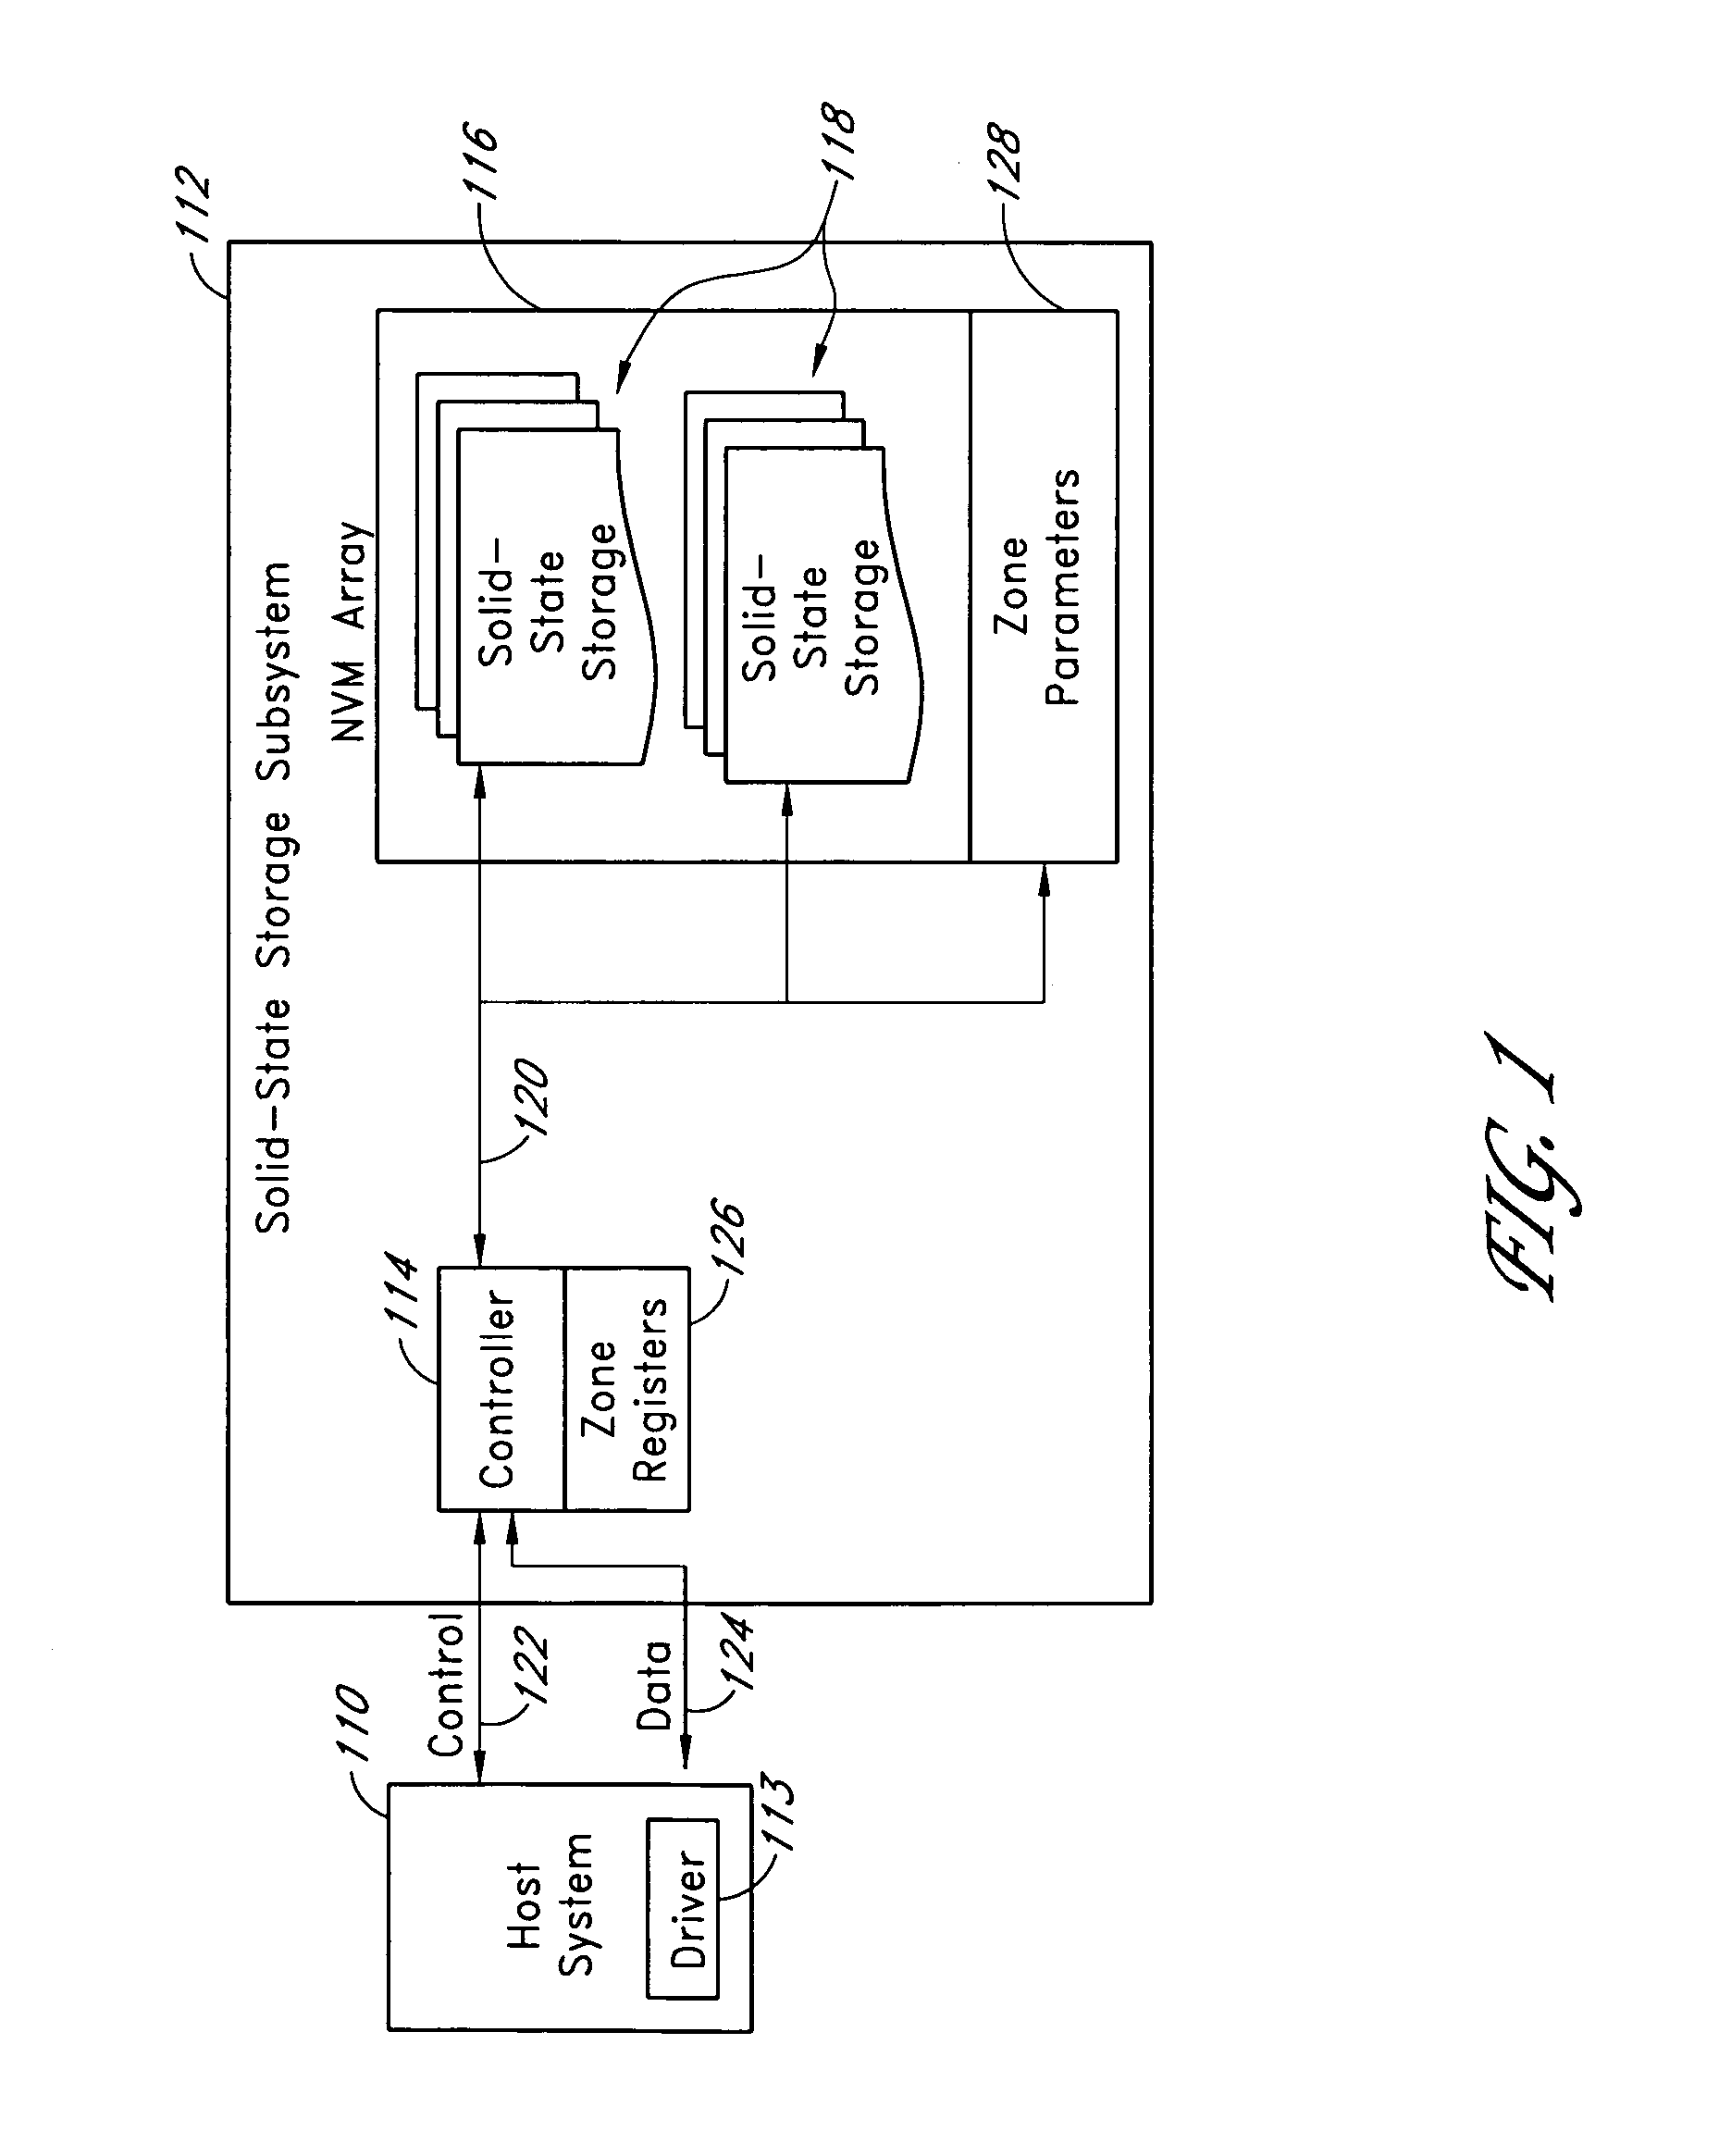 Systems and methods for storing data in segments of a storage subsystem